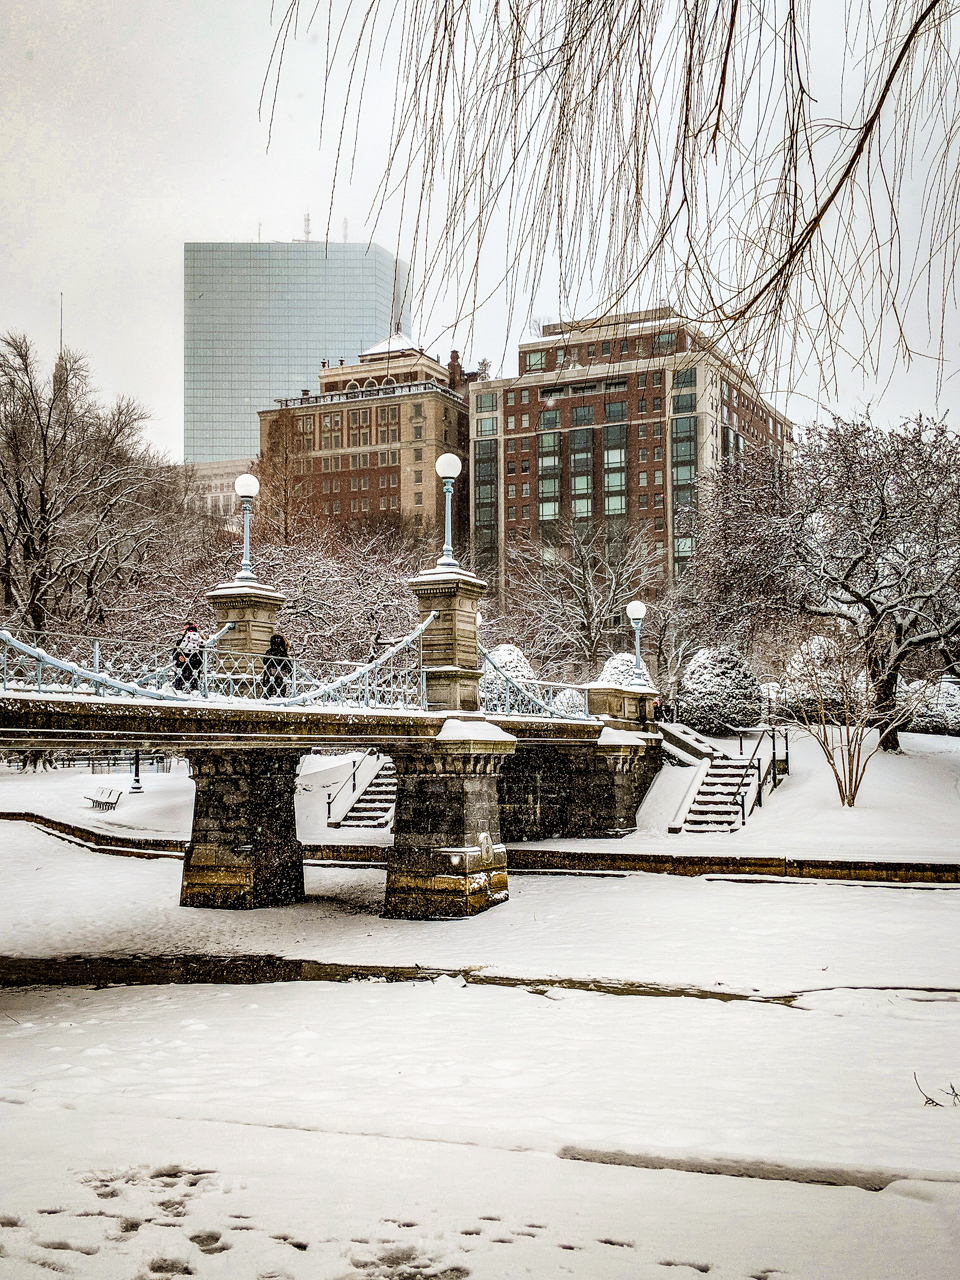 5 Boston Streets to Photograph in Winter featured by top Boston blogger Shannon Shipman: Charles Street